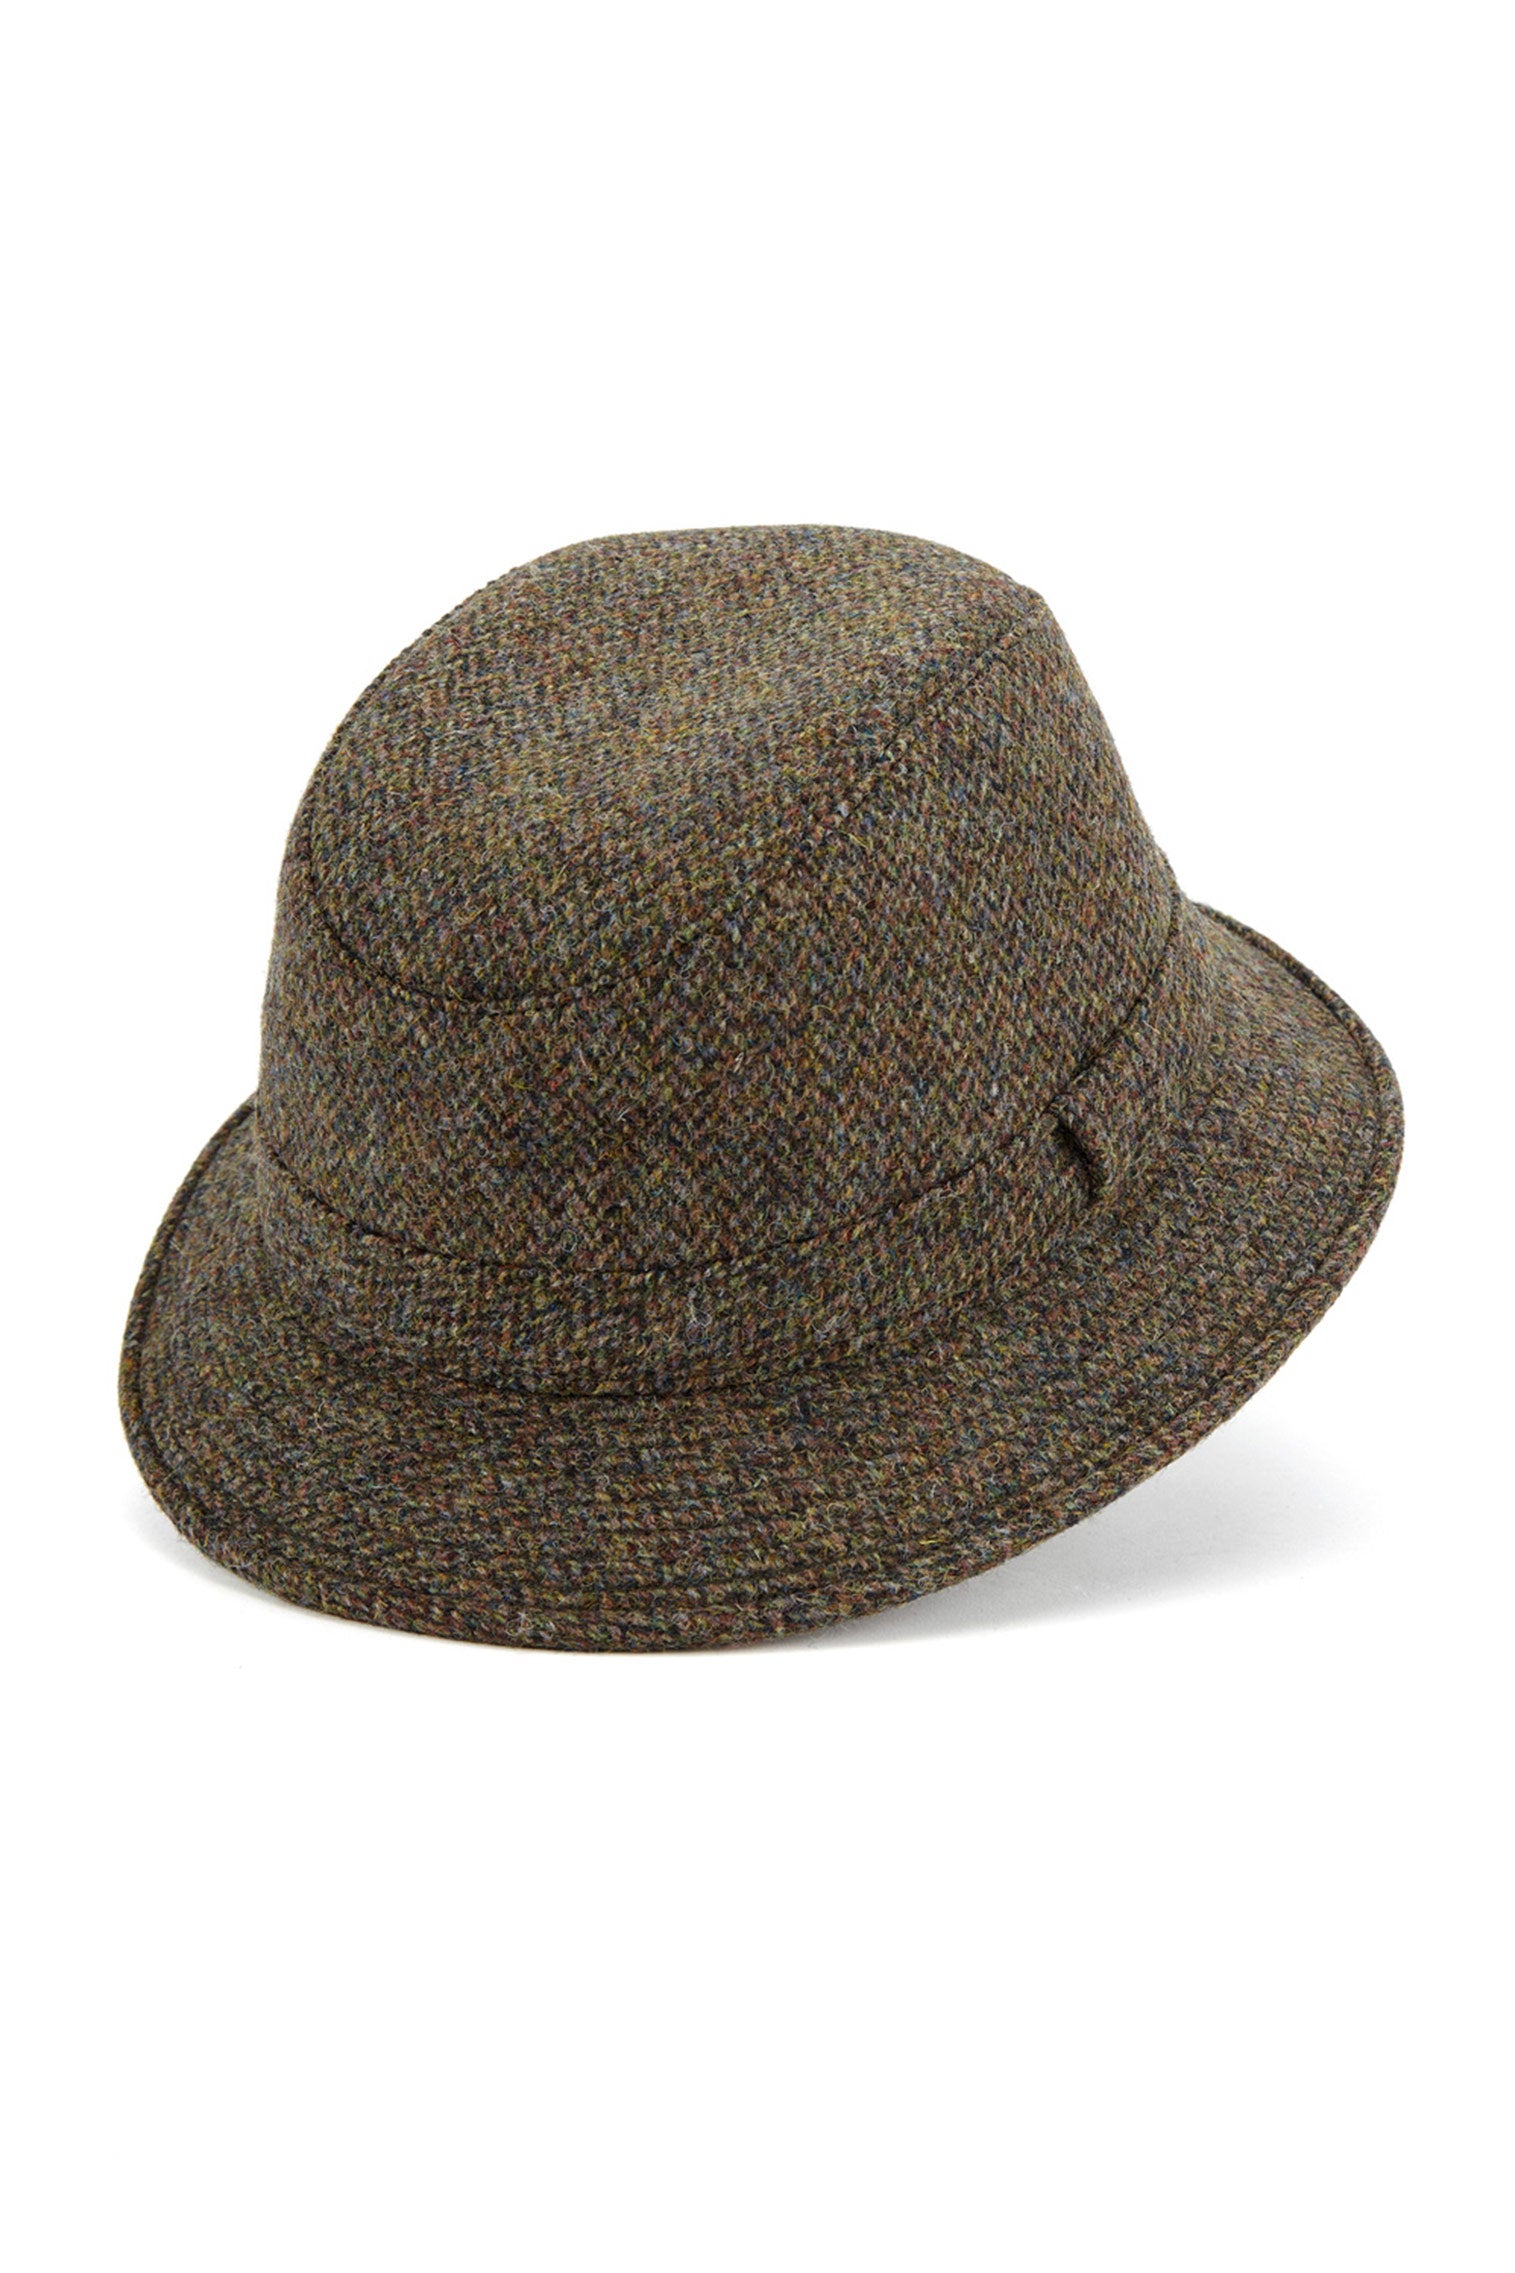 Grouse Tweed Rollable Hat - All Ready to Wear - Lock & Co. Hatters London UK